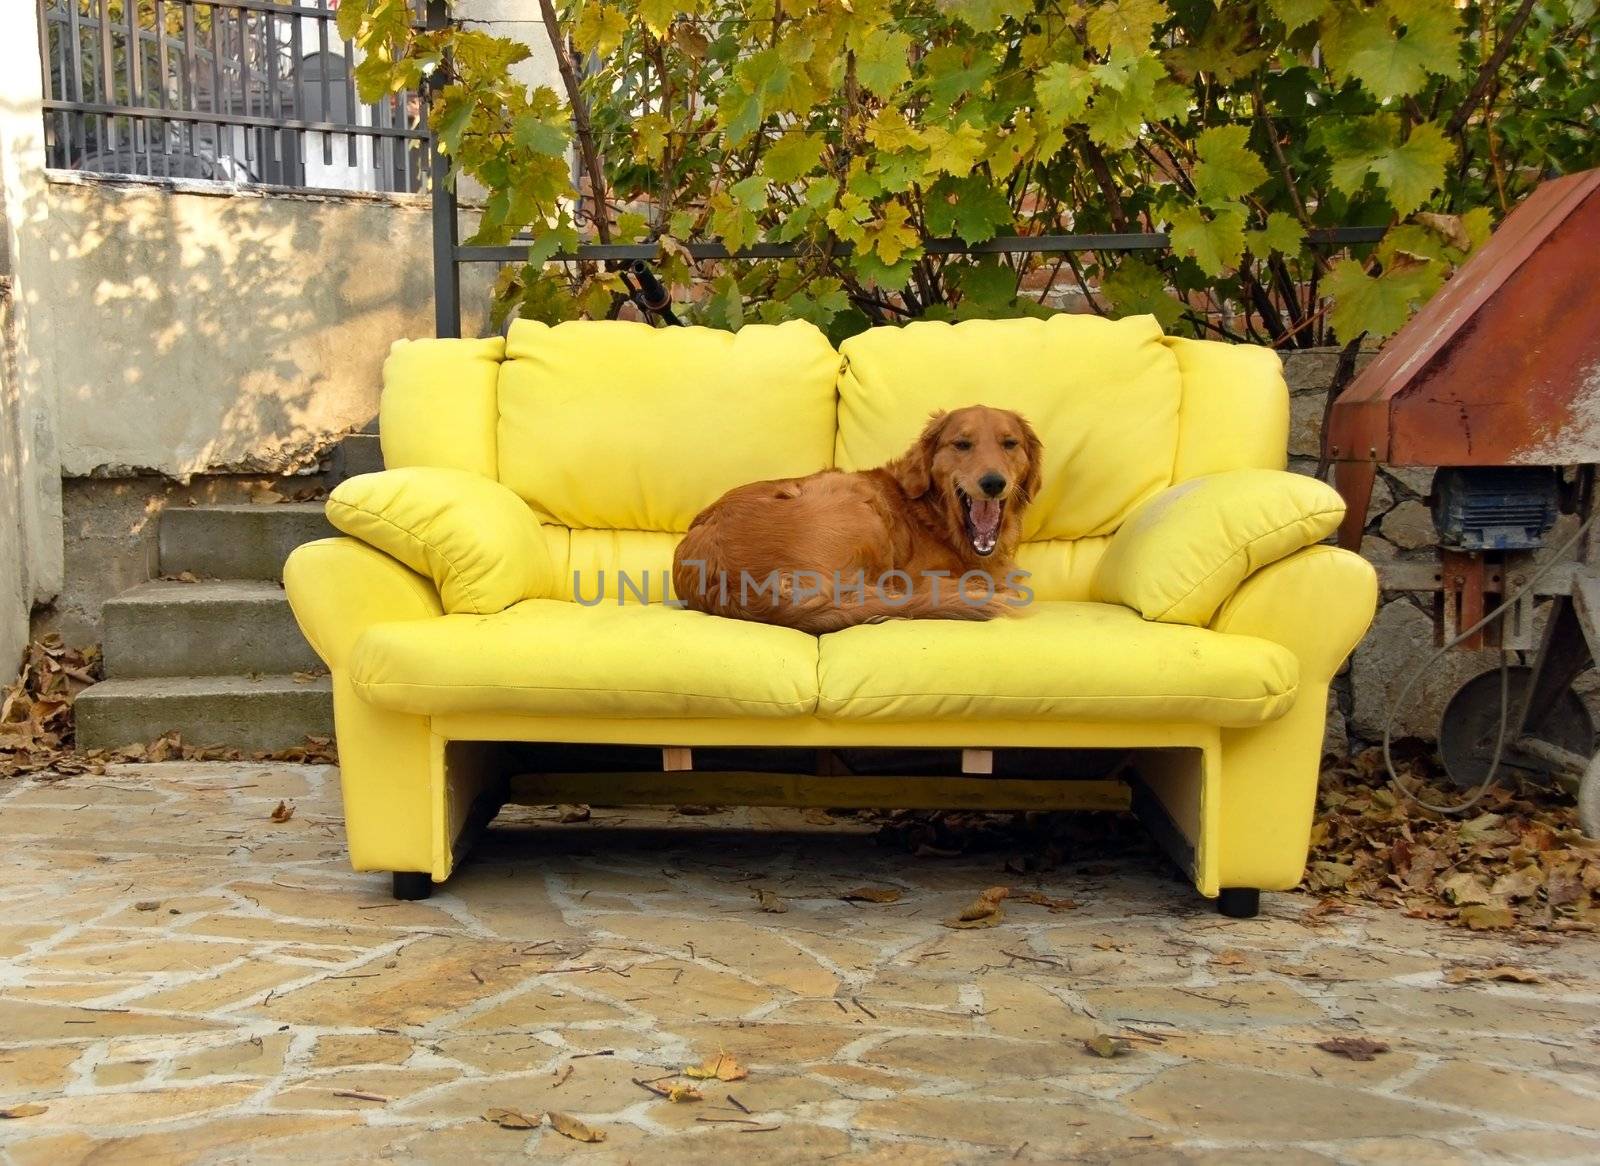 dog lying on yellow couch outdoor in yard